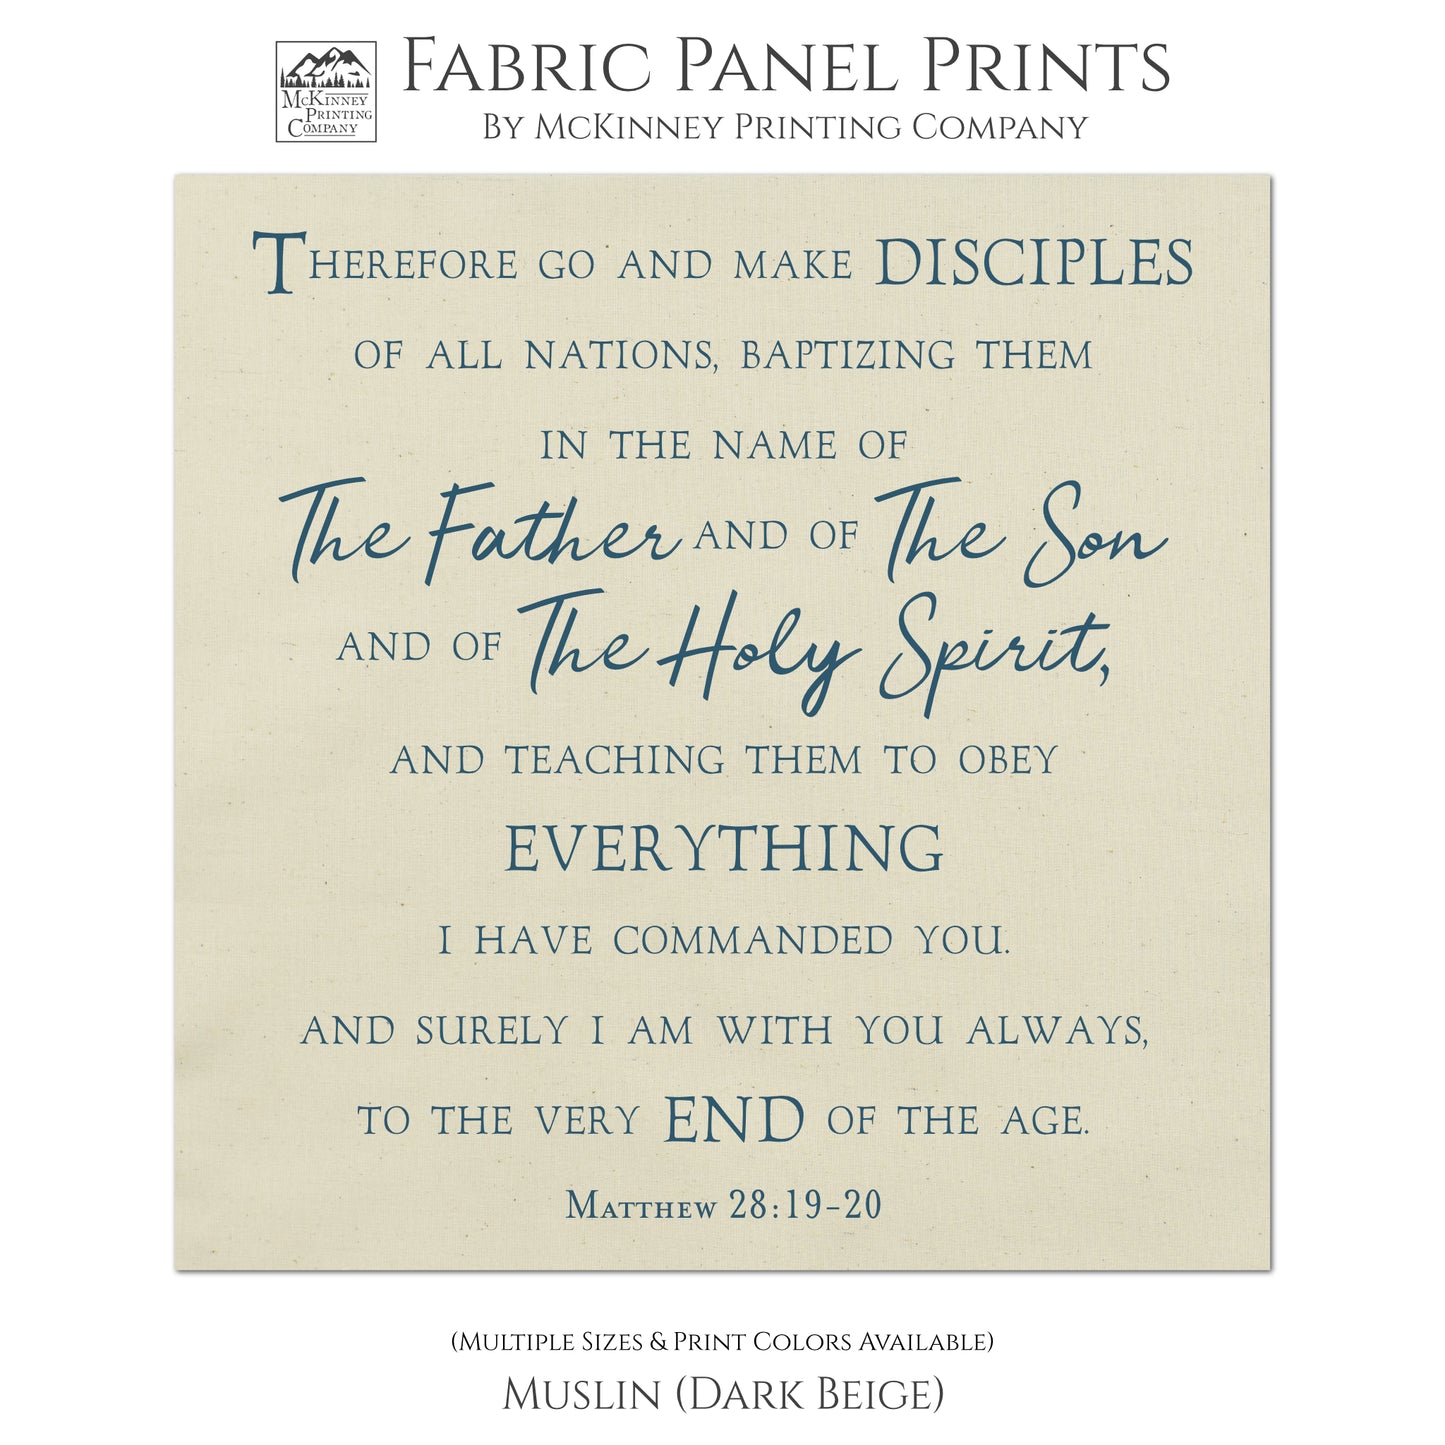 Therefore go and make disciples of all nations, baptizing them in the name of The Father and of The Son and of The Holy Spirit, and teaching them to obey everything I have commanded you. And surely I am with you always, to the very end of the age. Matthew 28:19-20, Fabric Panel Print, Religious Fabric, Scripture, Bible Verse Wall Art, Quilt Block - Muslin